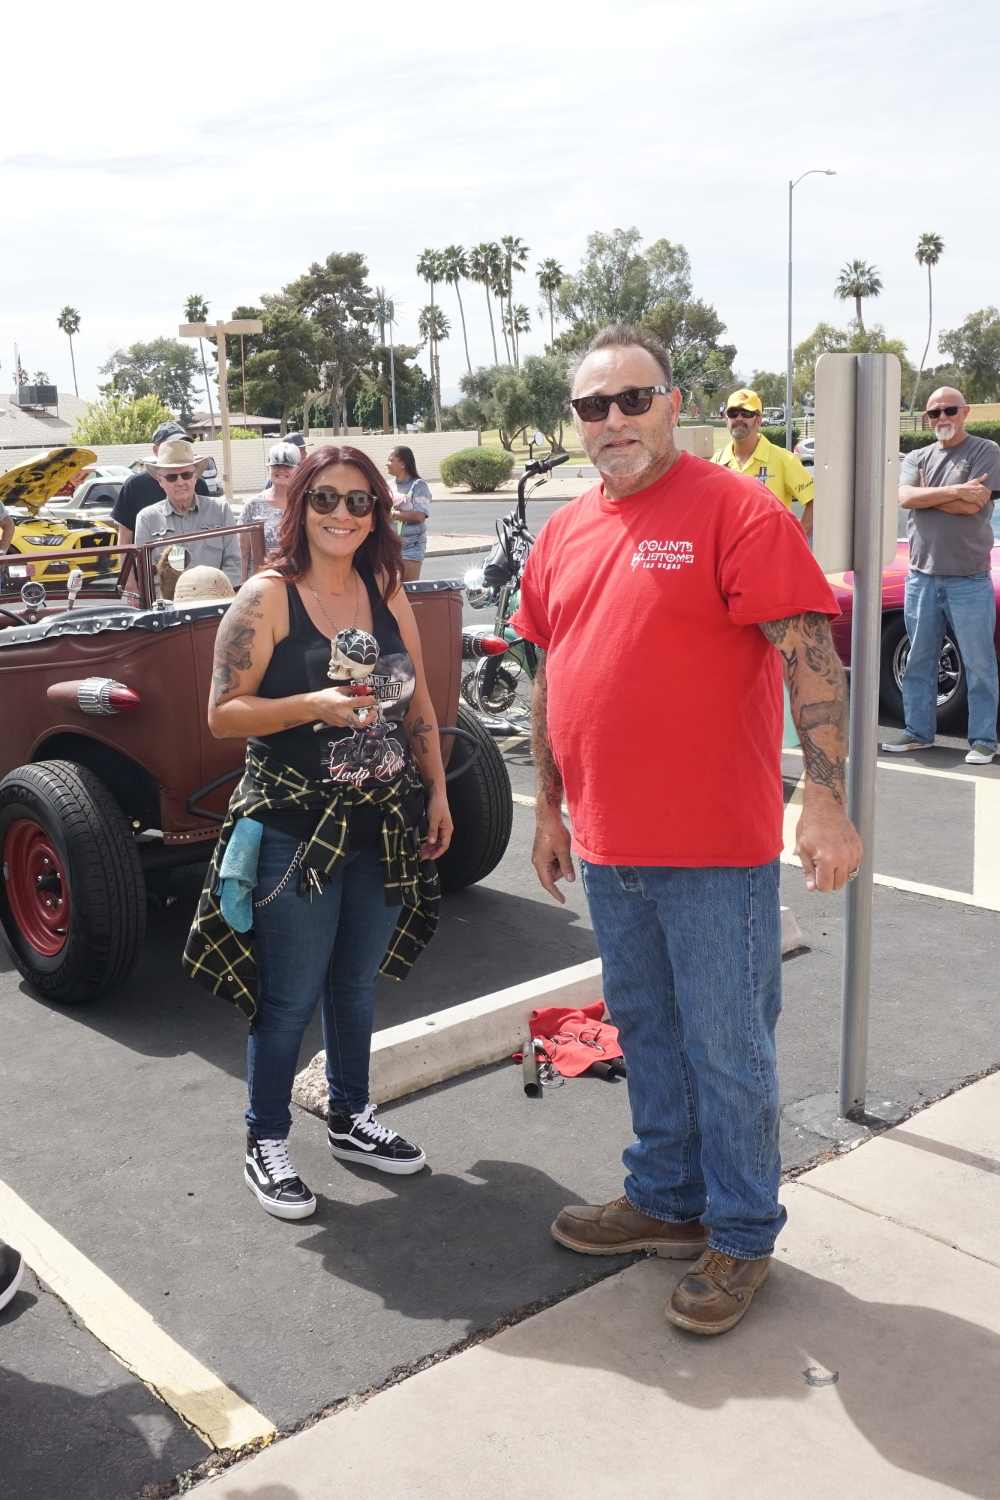 Motorcycle winner at the 1st Annual Car and Bike Show, Our Lady of Lourdes Parish, Sun City West, AZ